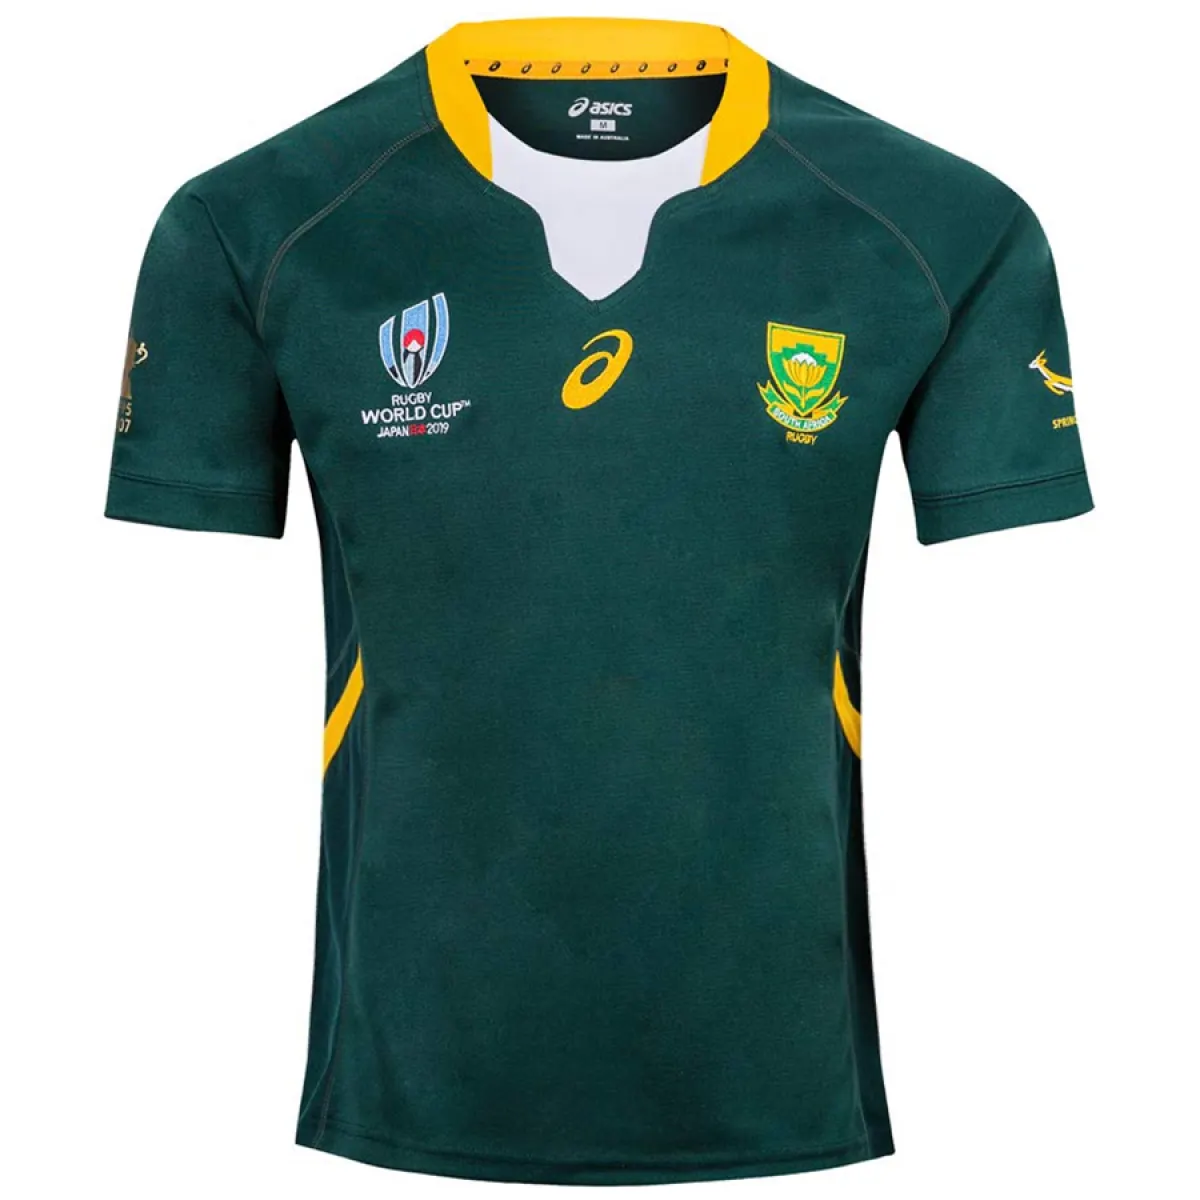 Asics SOUTH AFRICA SPRINGBOKS “Rugby World Cup Japan